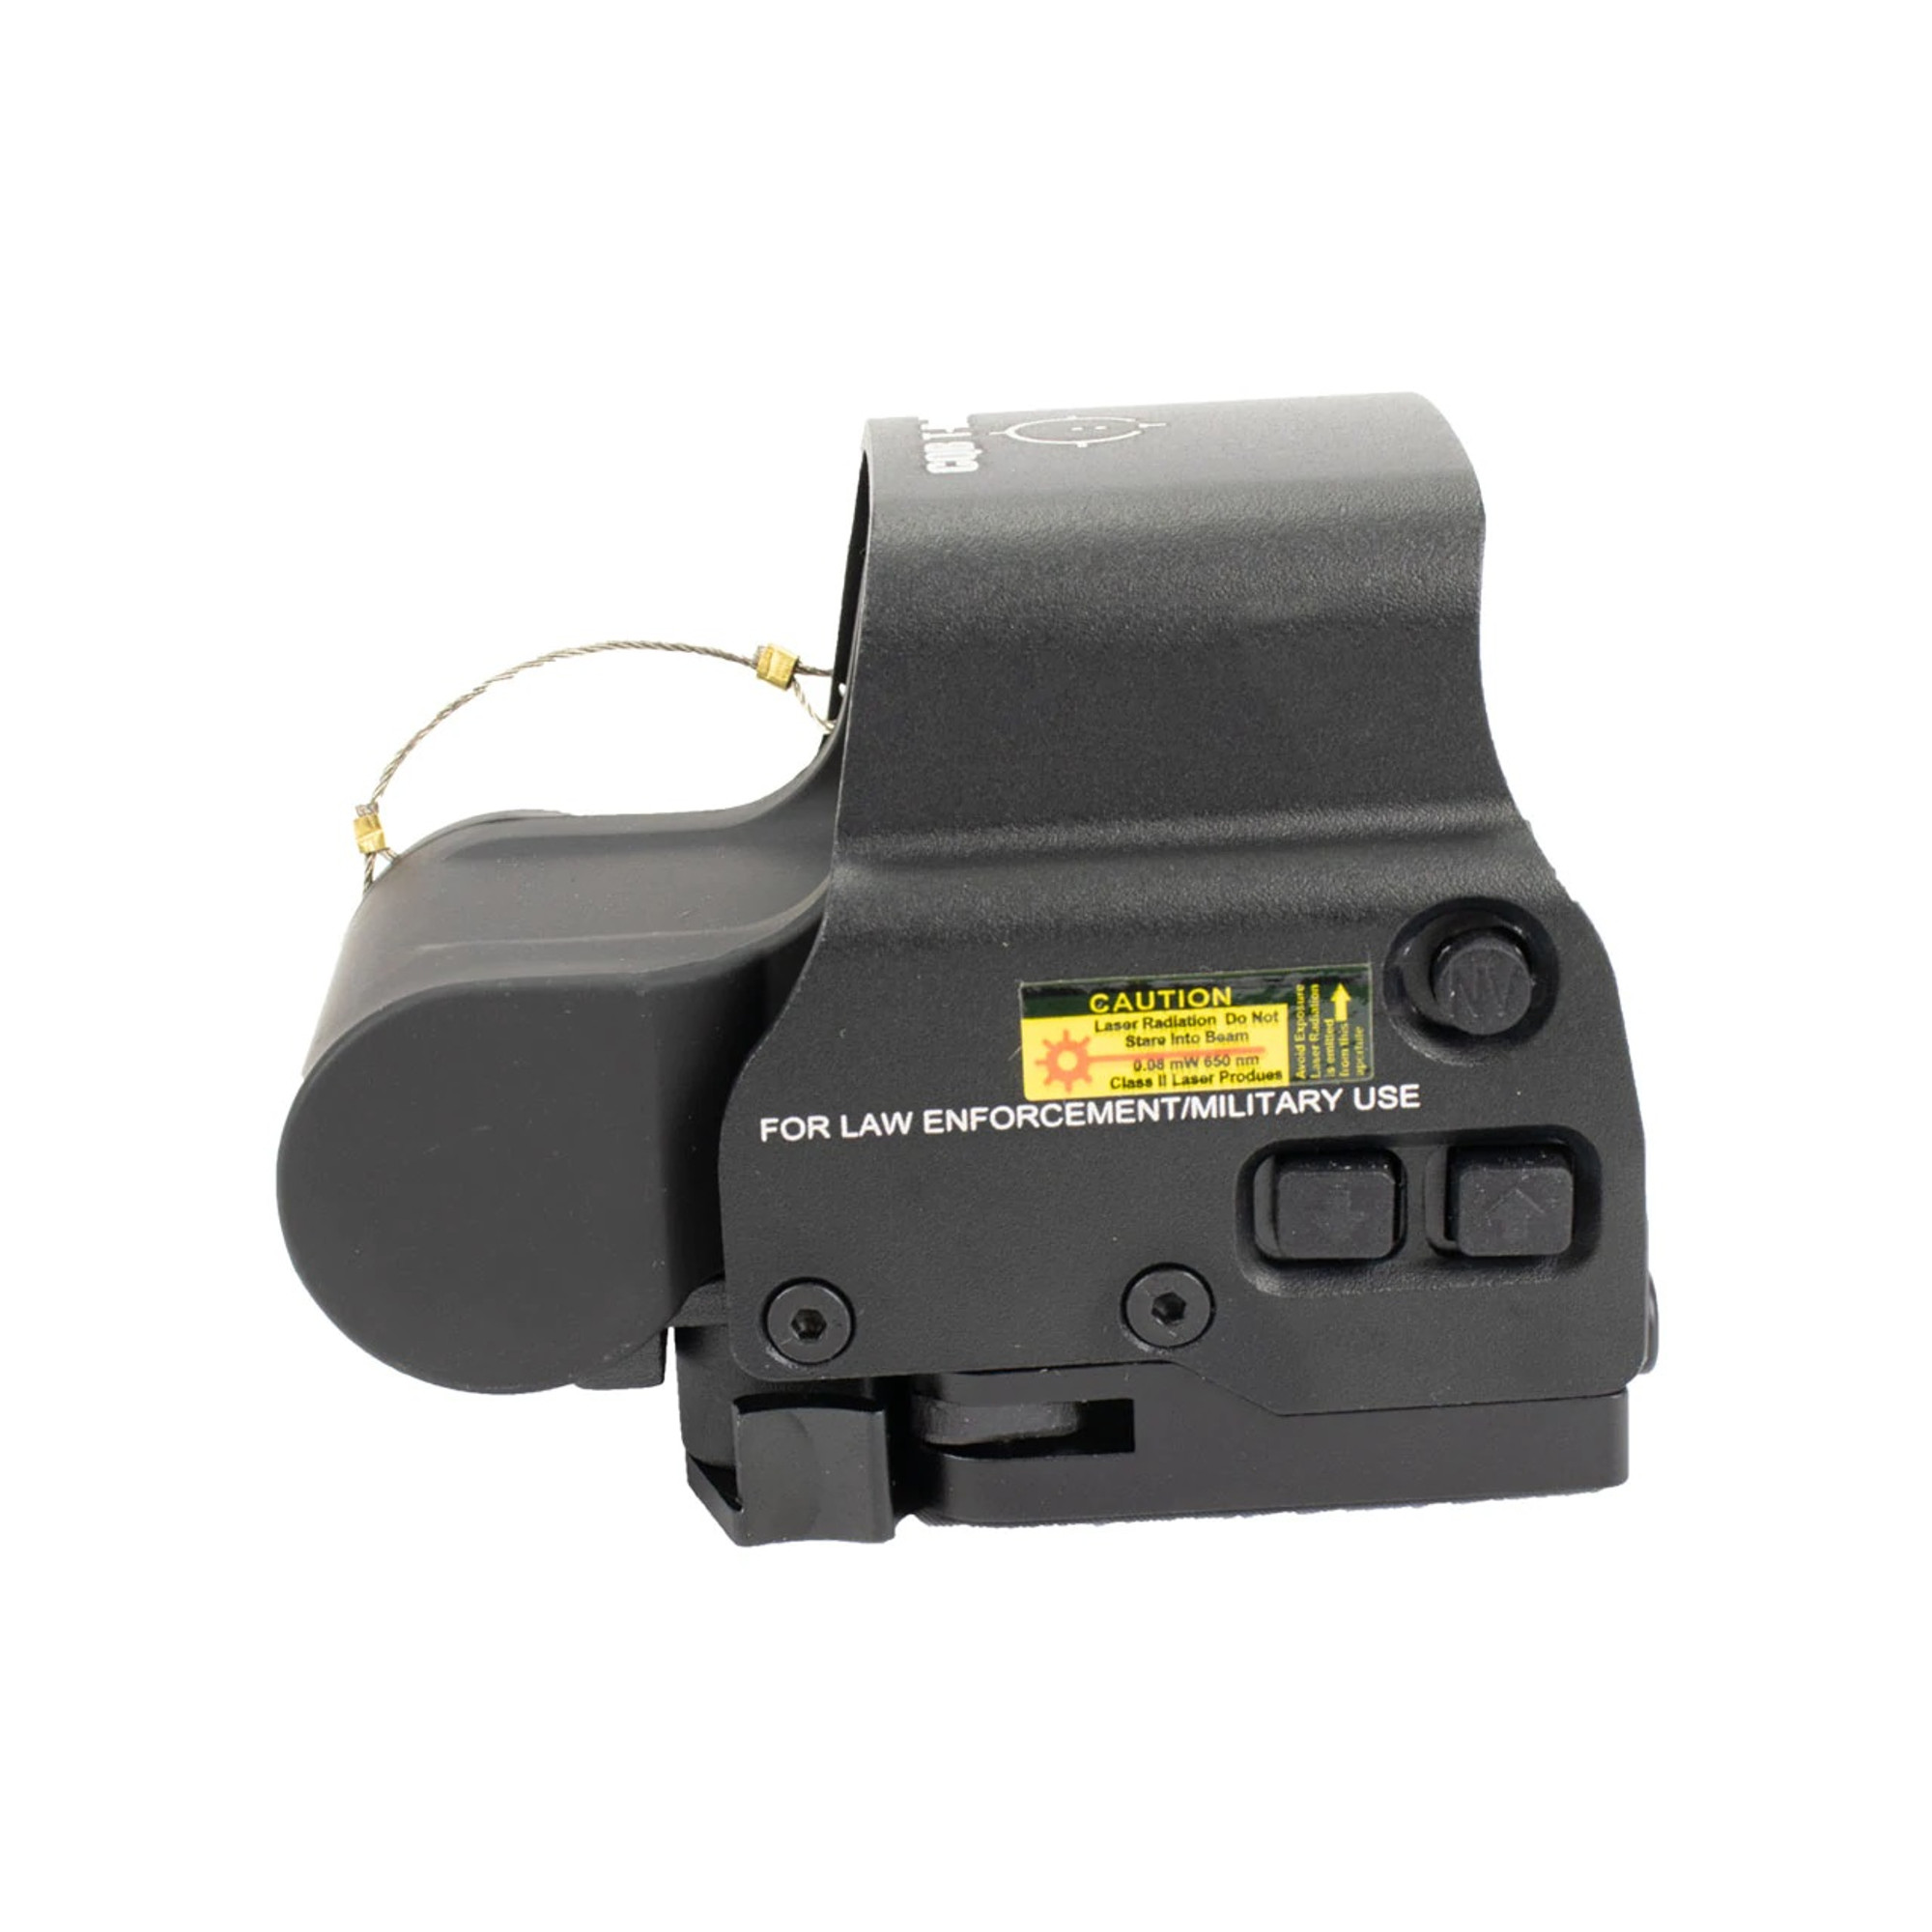 556 Holographic Sight Side Button Version